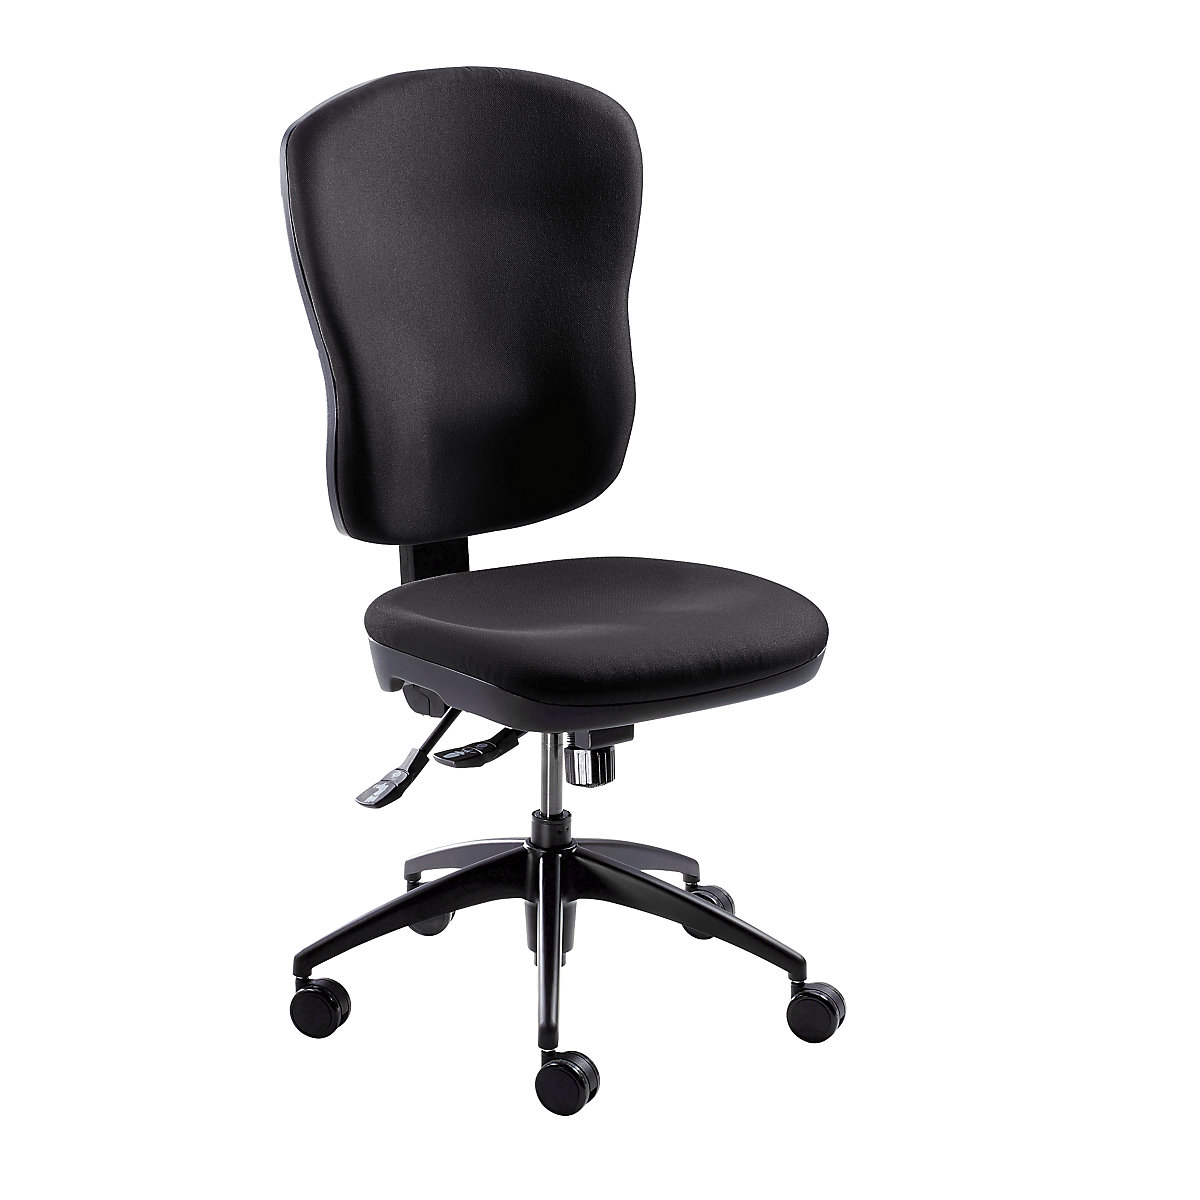 Operator swivel chair, back rest height 600 mm – eurokraft pro, point synchronous mechanism, contoured seat, without arm rests, black covering-4